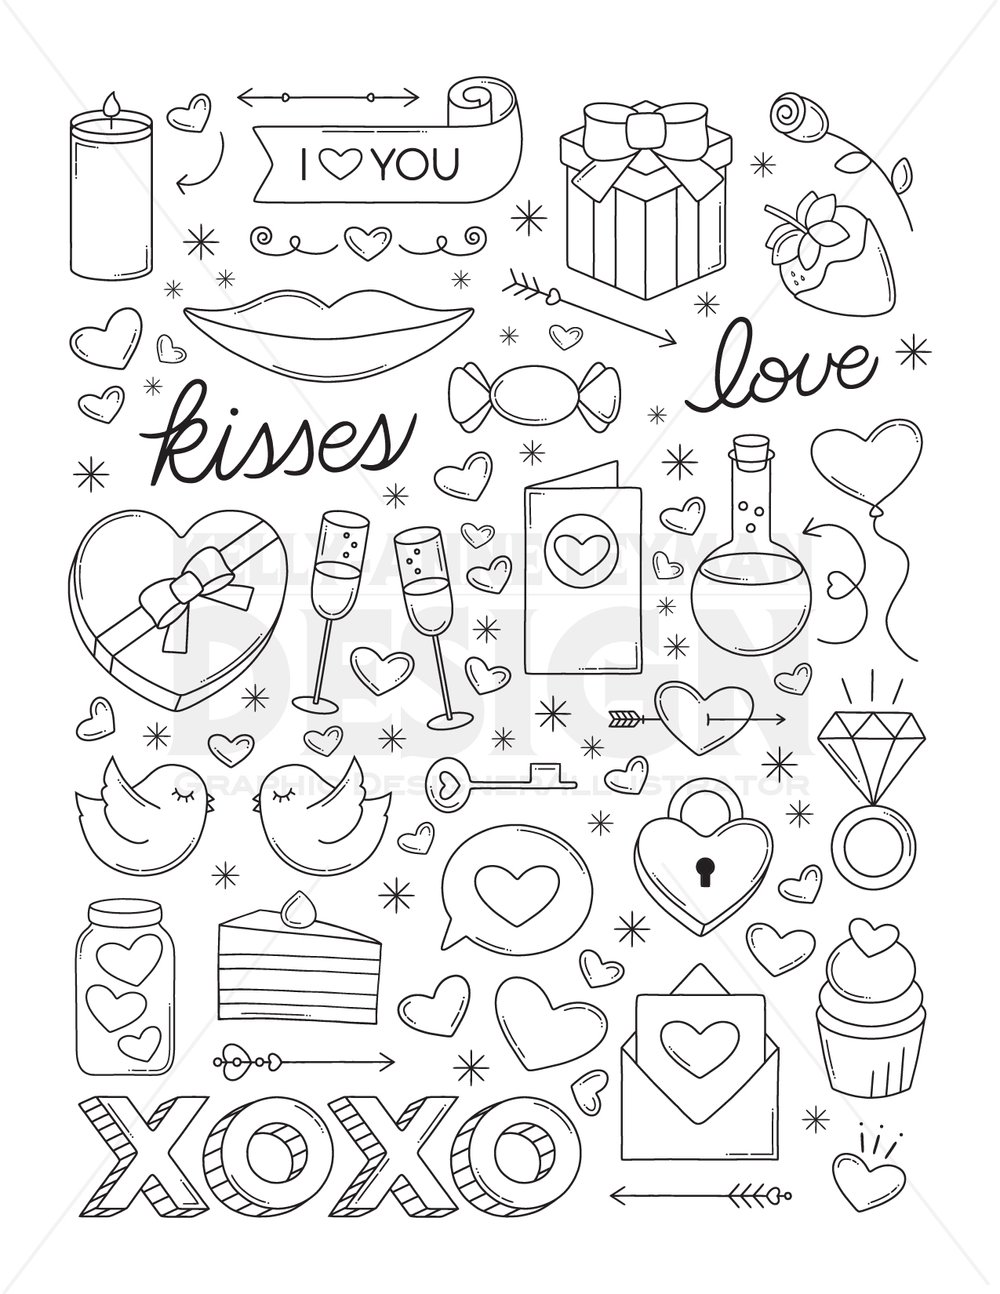 Printable coloring pages for adults retro coloring page love digital coloring pages vintage printable digital download instant download â kelly